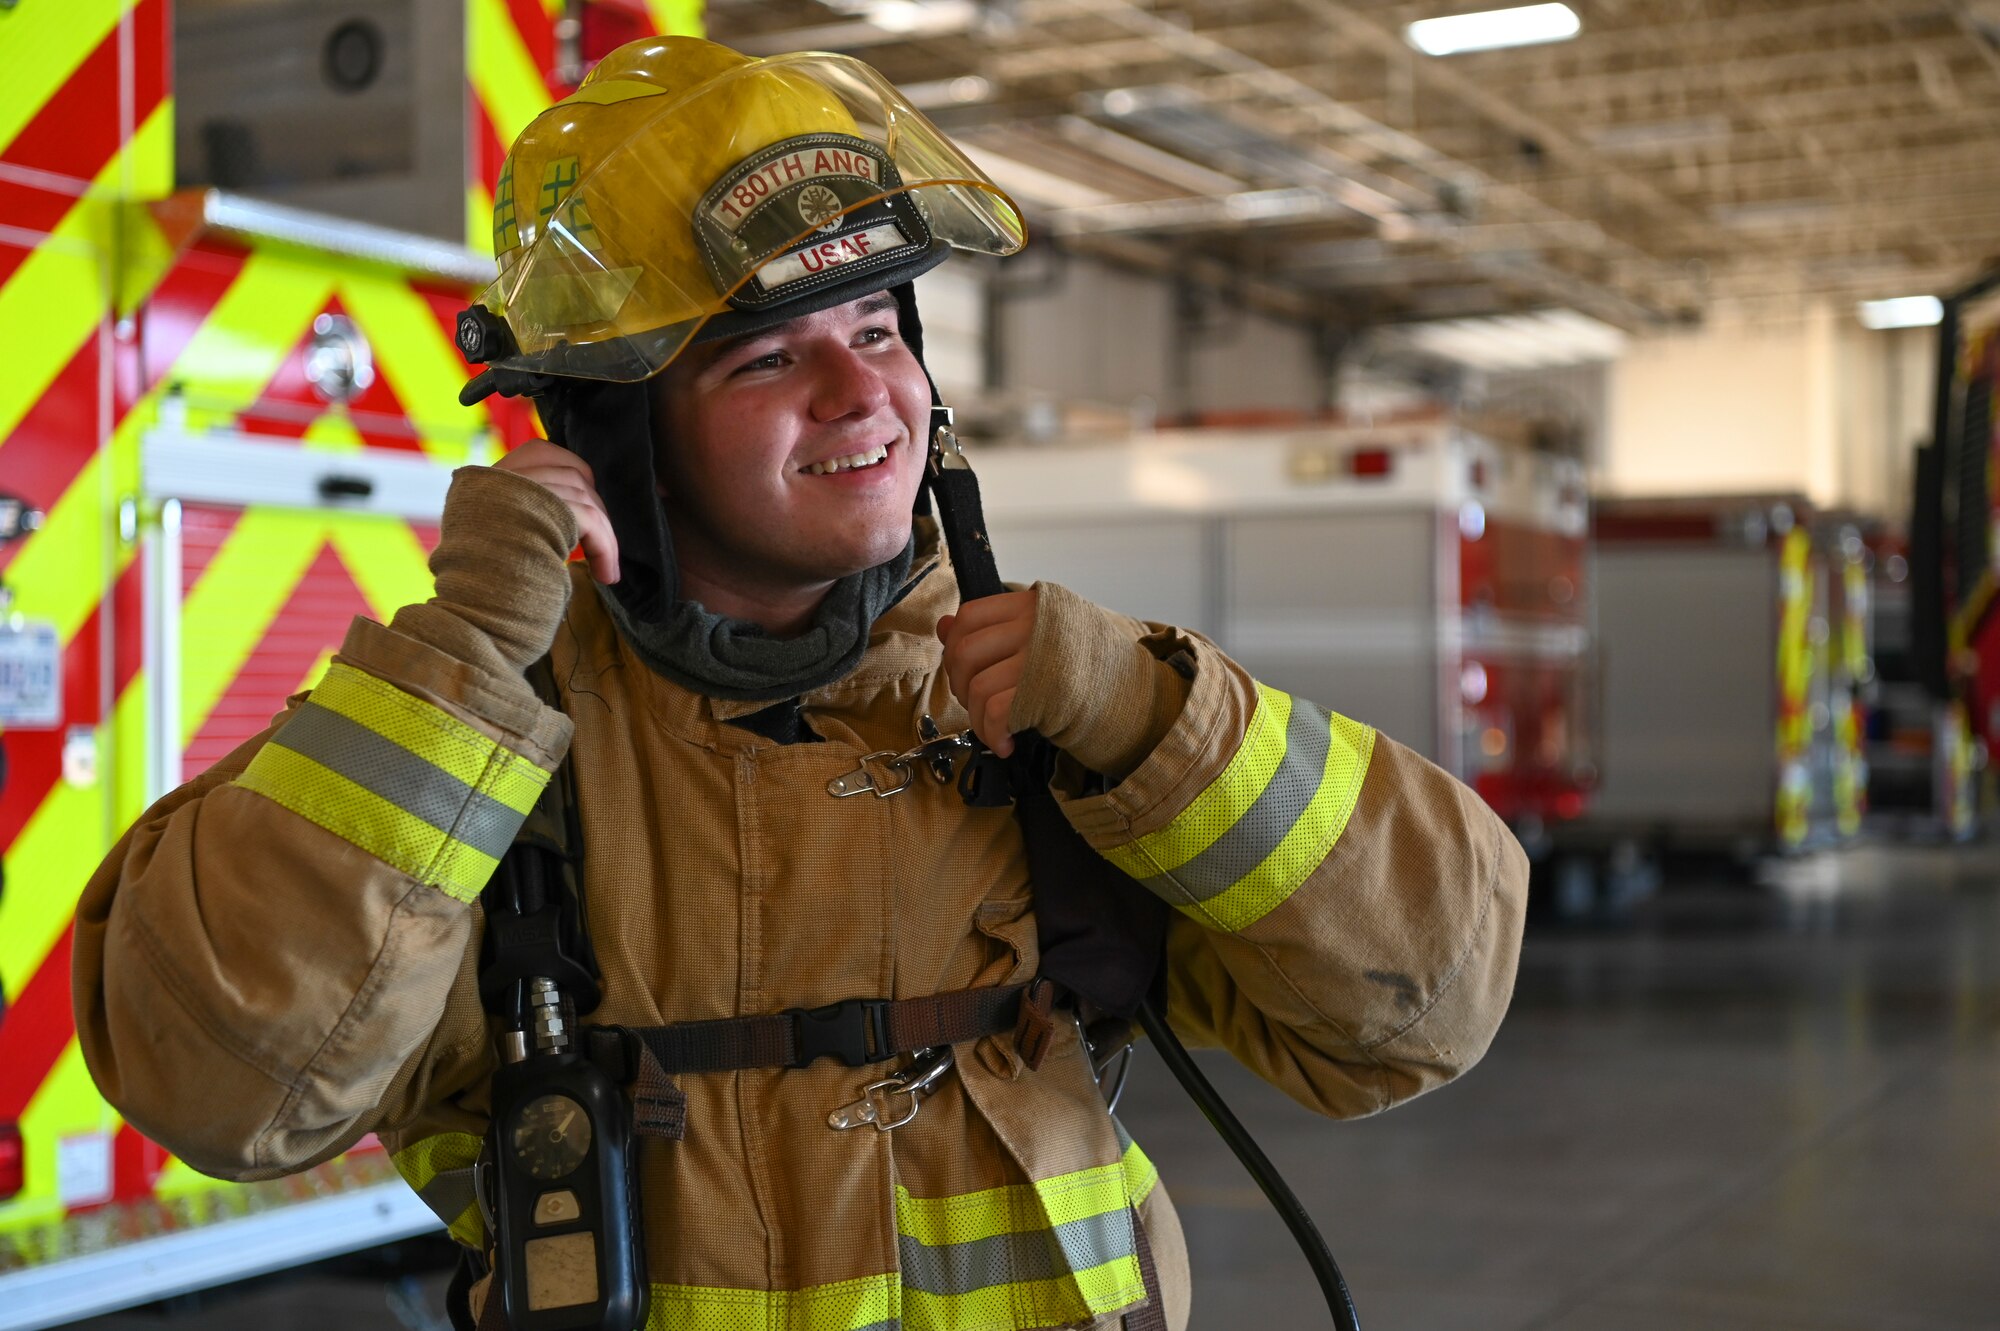 Carson Duncan, Baylor University Air Force ROTC cadet, puts on firefighting equipment during Project Tuskegee 2.0 at Dyess Air Force Base, Texas, Aug. 1, 2023. The project is intended to increase the cadets' understanding of Air Force and Space Force missions and day-to-day operations. The 19 cadets in attendance represent 19 different Air Force ROTC detachments across the enterprise's four regions. (U.S. Air Force photo by Airman 1st Class Emma Anderson)